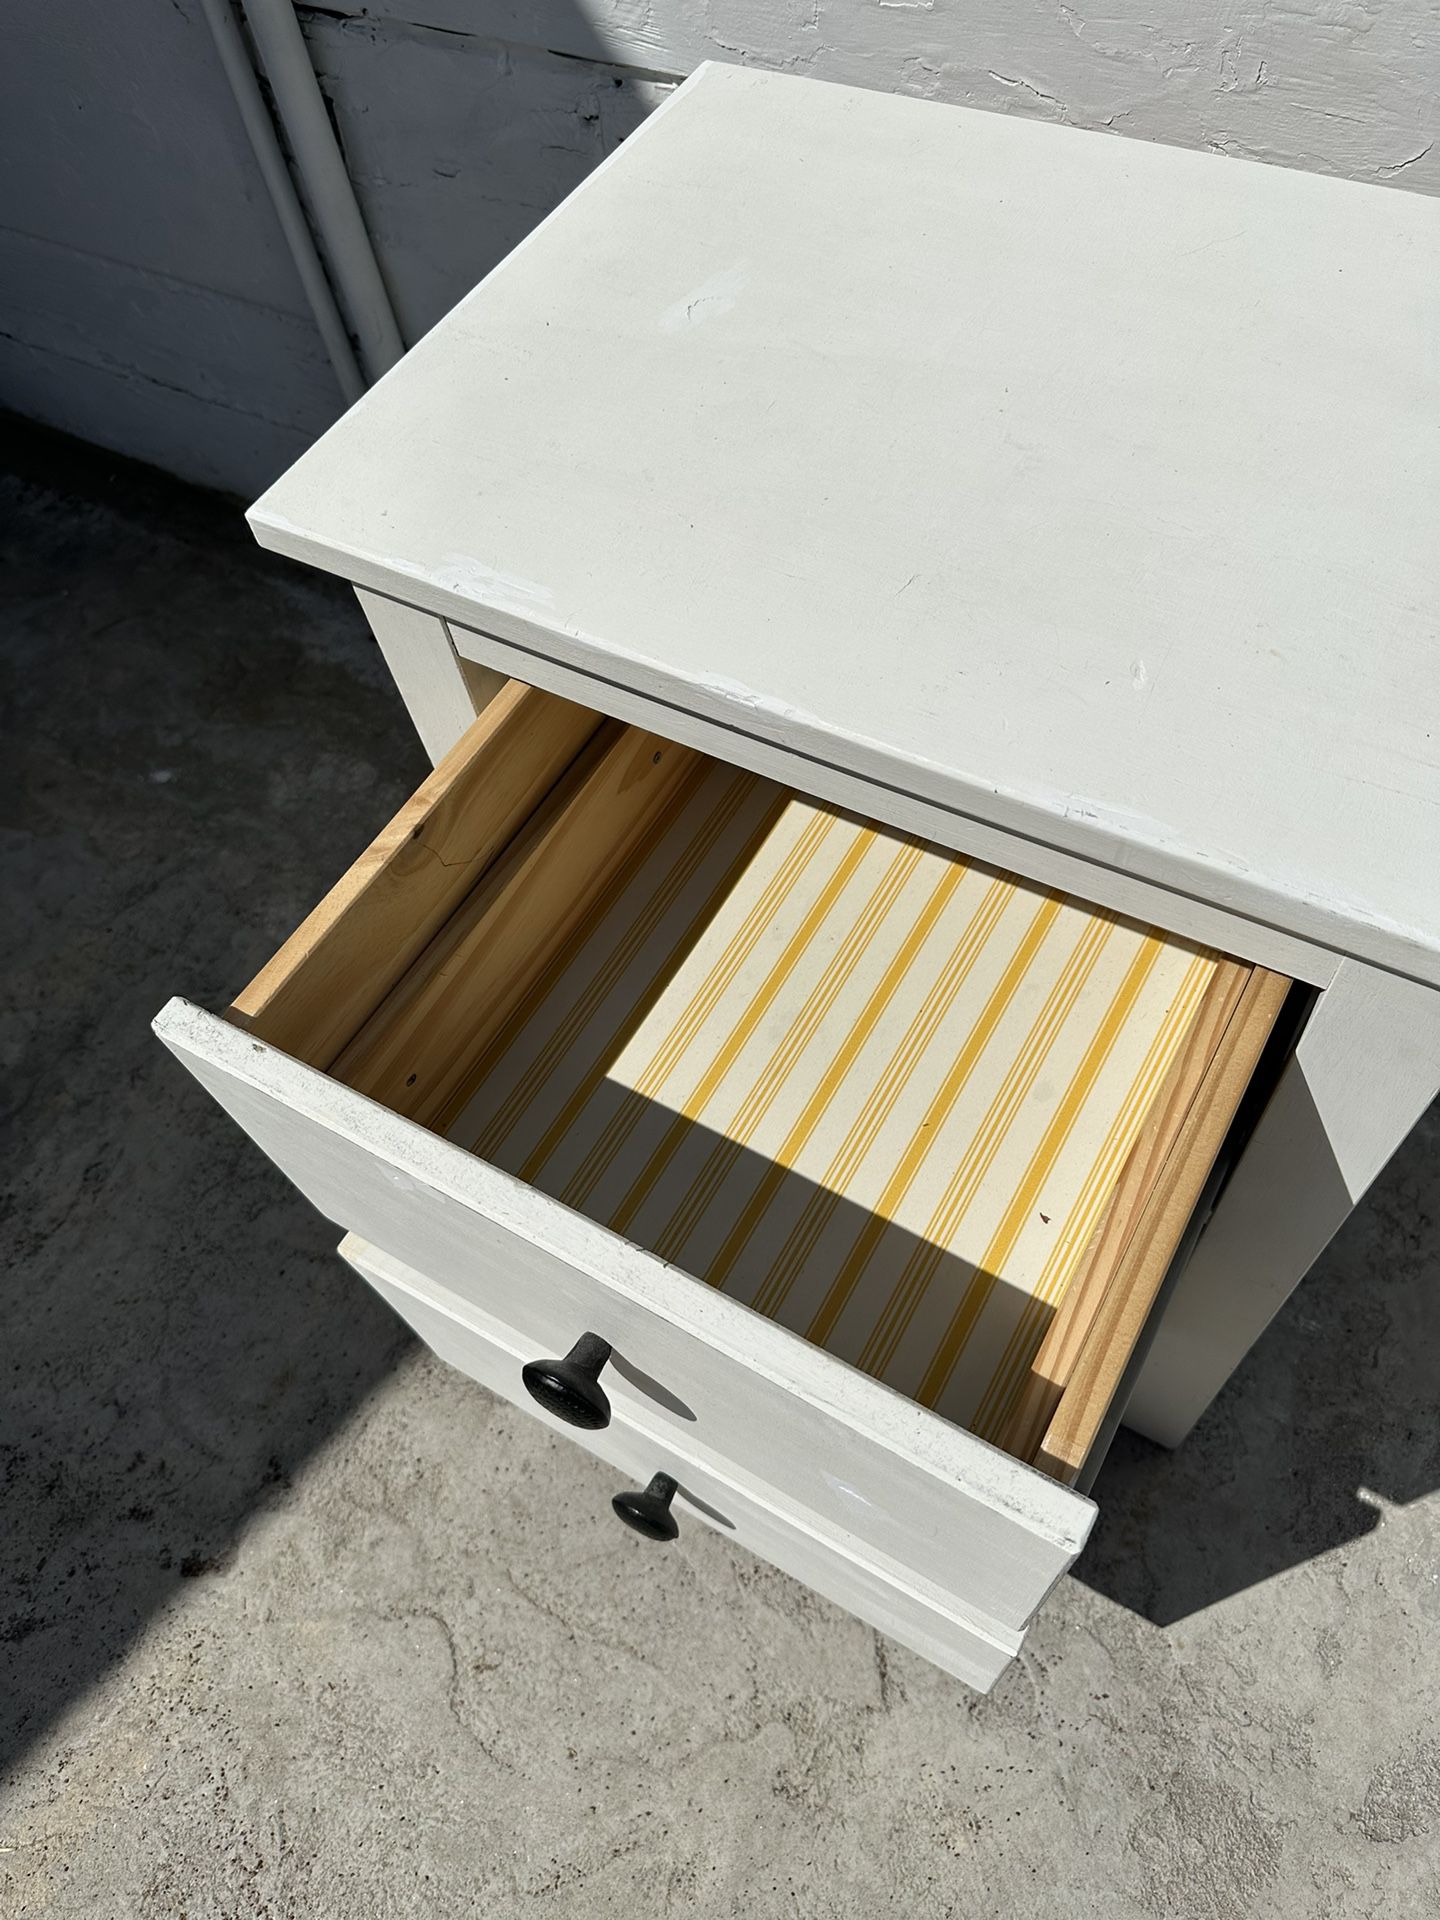 Chic Wooden White Nightstand with Drawers and Sliding Storage Organizer  - SIZE: 22”w x 15.5”d x 25.5”h